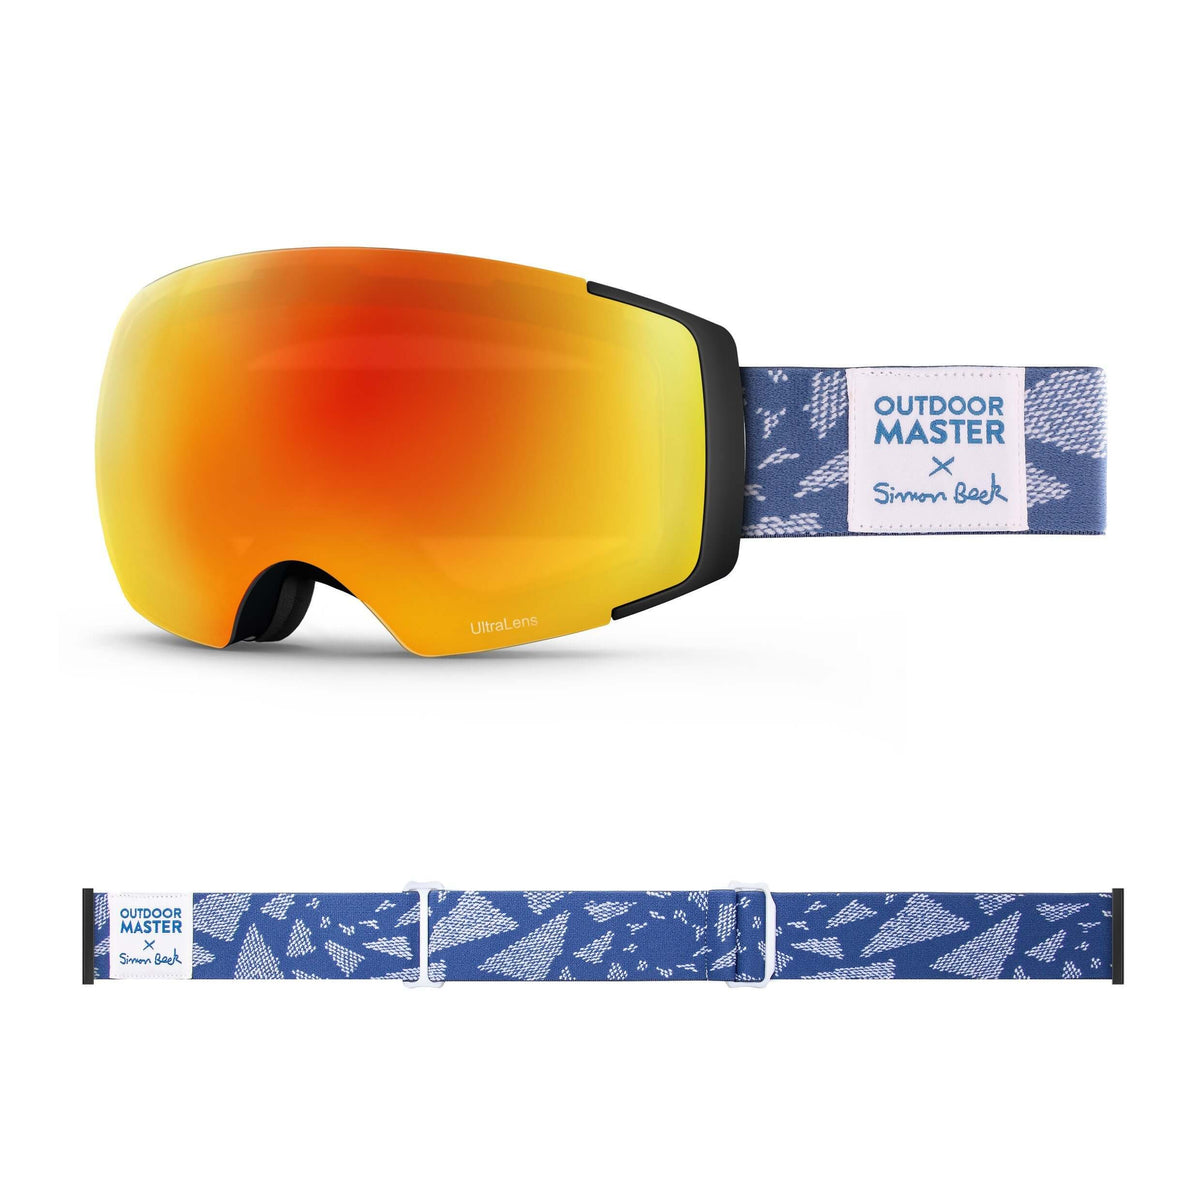 OutdoorMaster x Simon Beck Ski Goggles Pro Series - Snowshoeing Art Limited Edition OutdoorMaster UltraLens VLT 25% Optimized Orange with REVO Red Flying Triangles